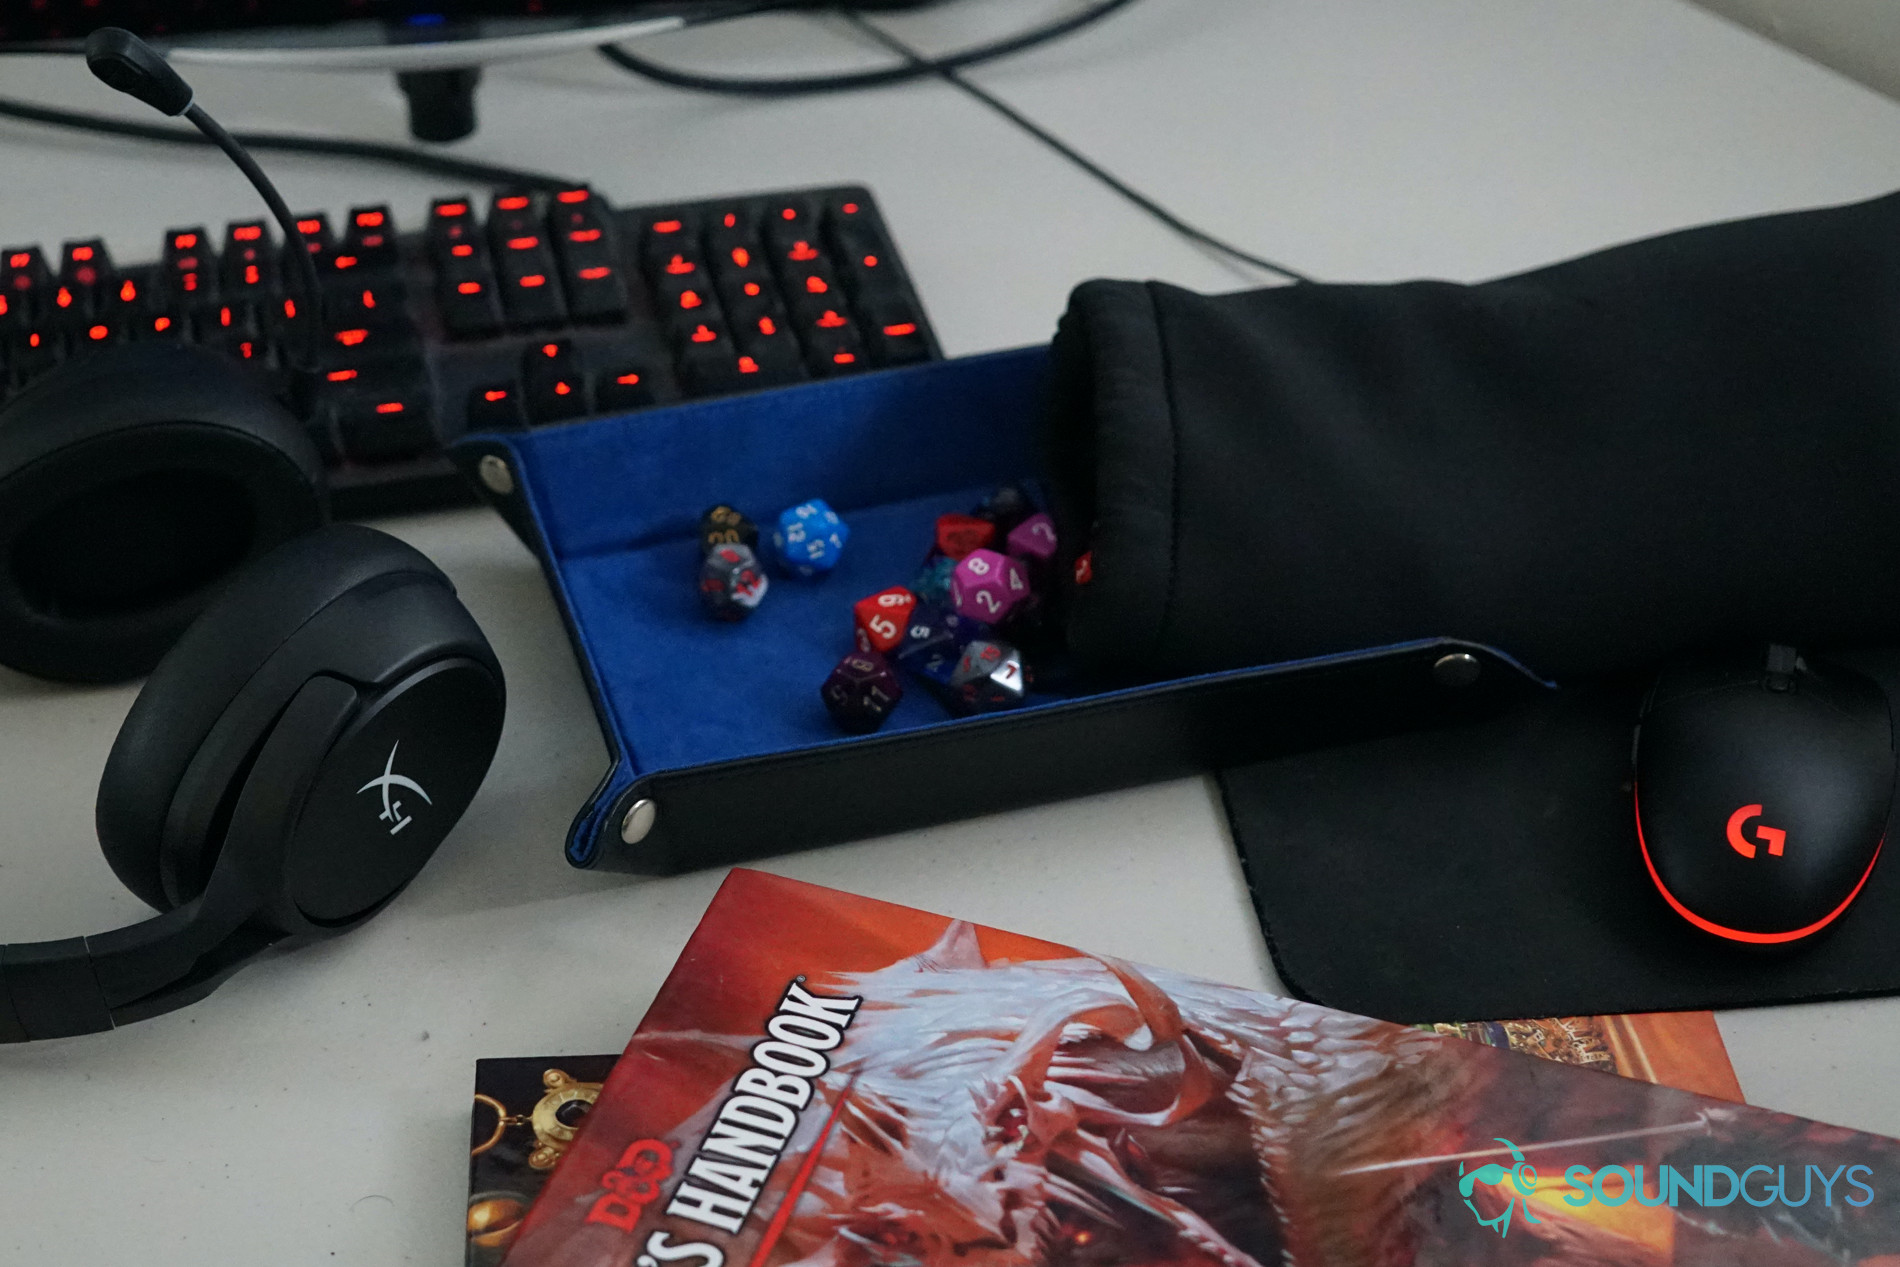 The HyperX Cloud Flight S sits on a desk in front of a computer monitor and keyboard, next to some polyhedral dice, with copies of the Dungeons and Dragons Players Handbook and Xanathar's Guide to Everything in the foreground.